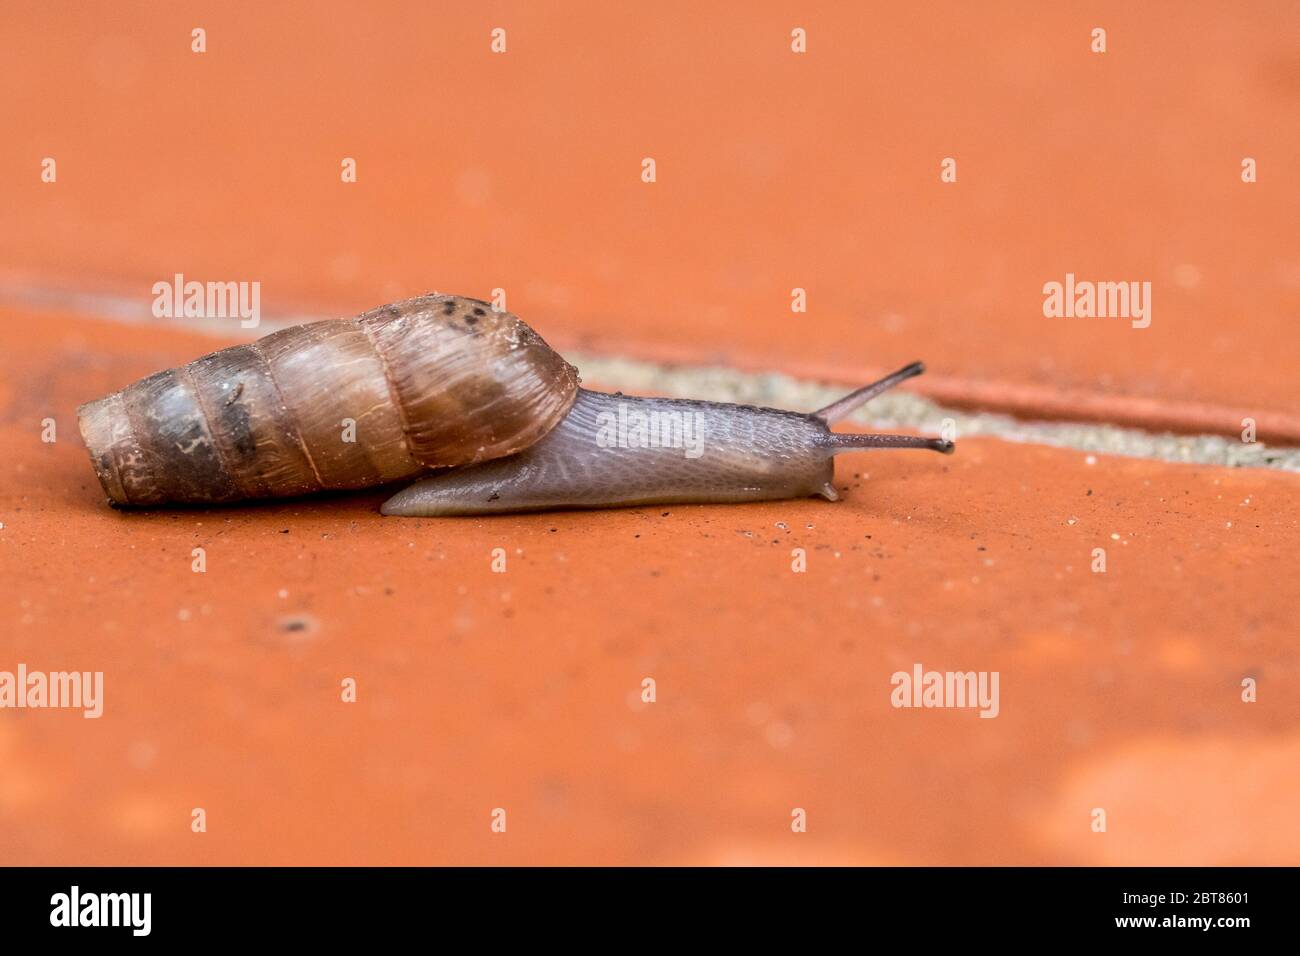 Rumina Decollata macro land snail carnivorous omnivore used for natural control of pests or species pulmonary gastropod mollusk family Subulinidae Stock Photo